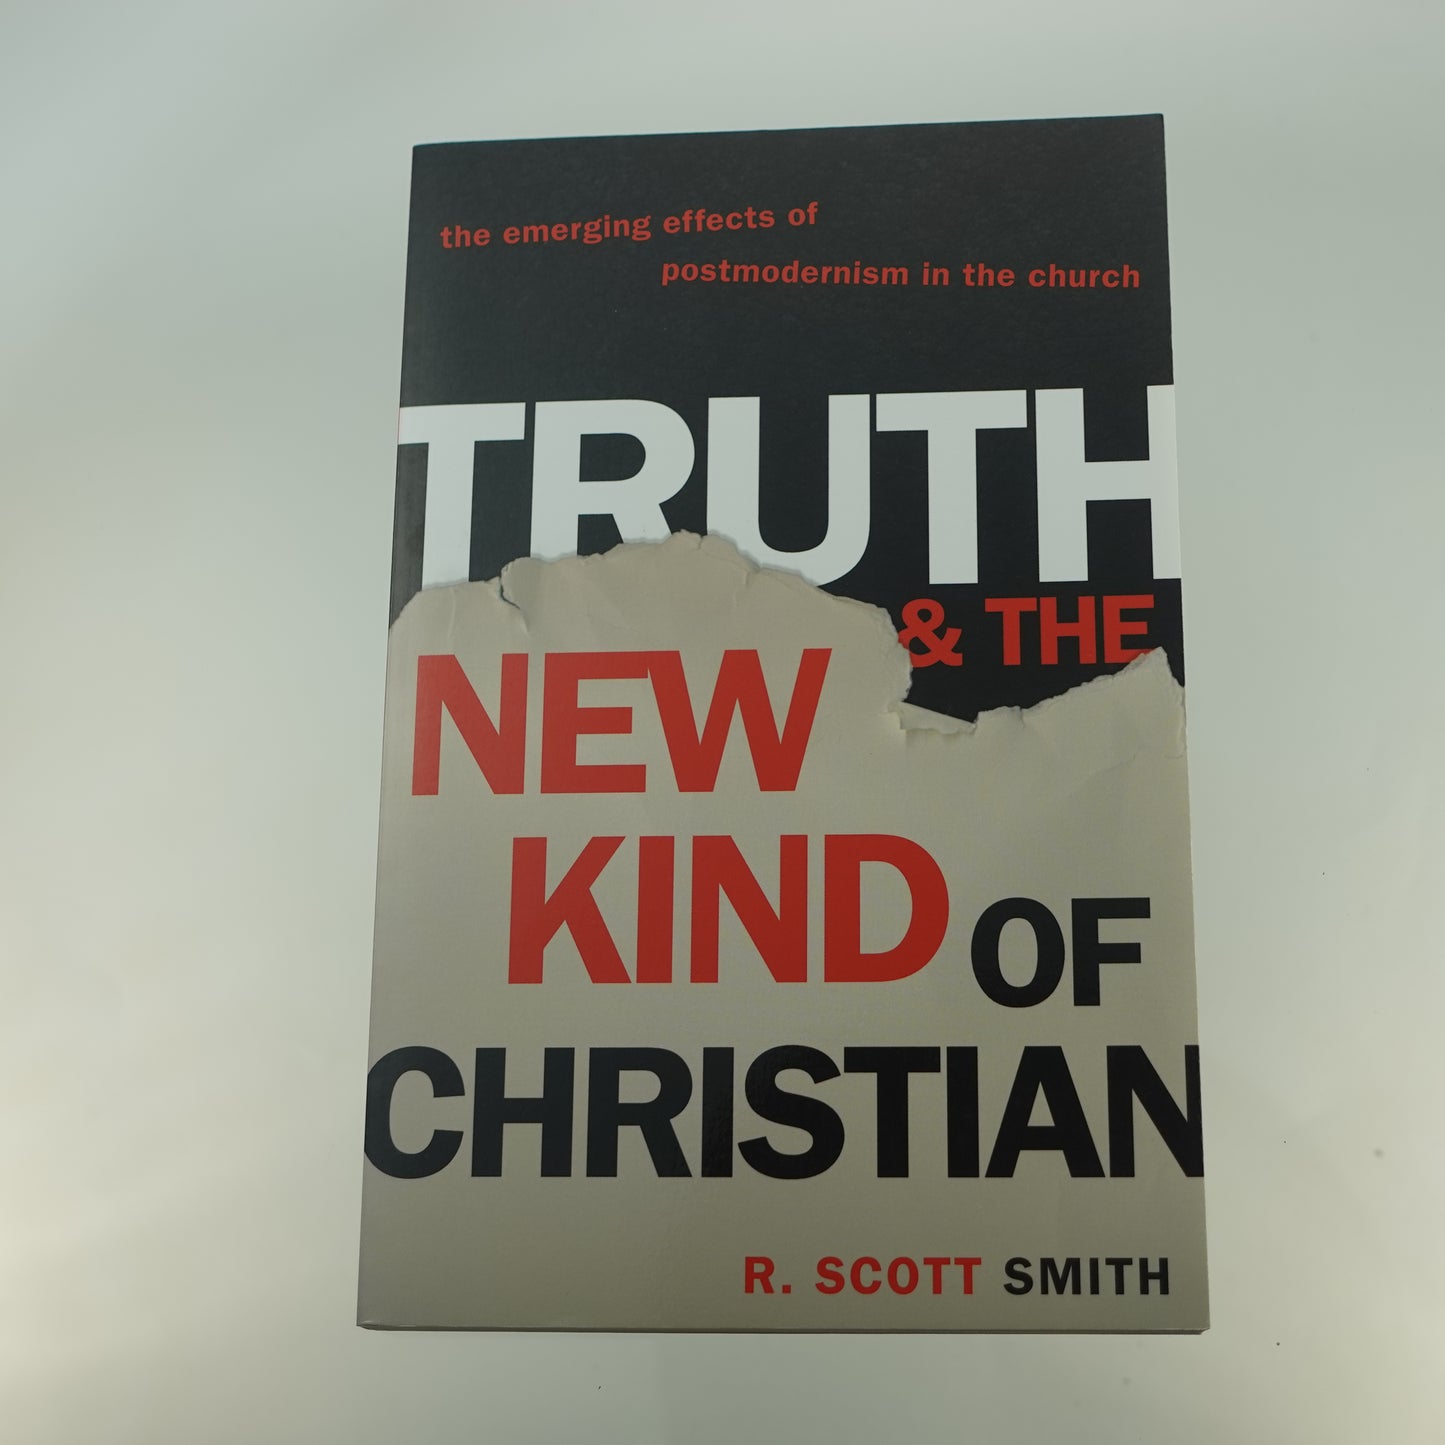 Truth & the New Kind of Christian